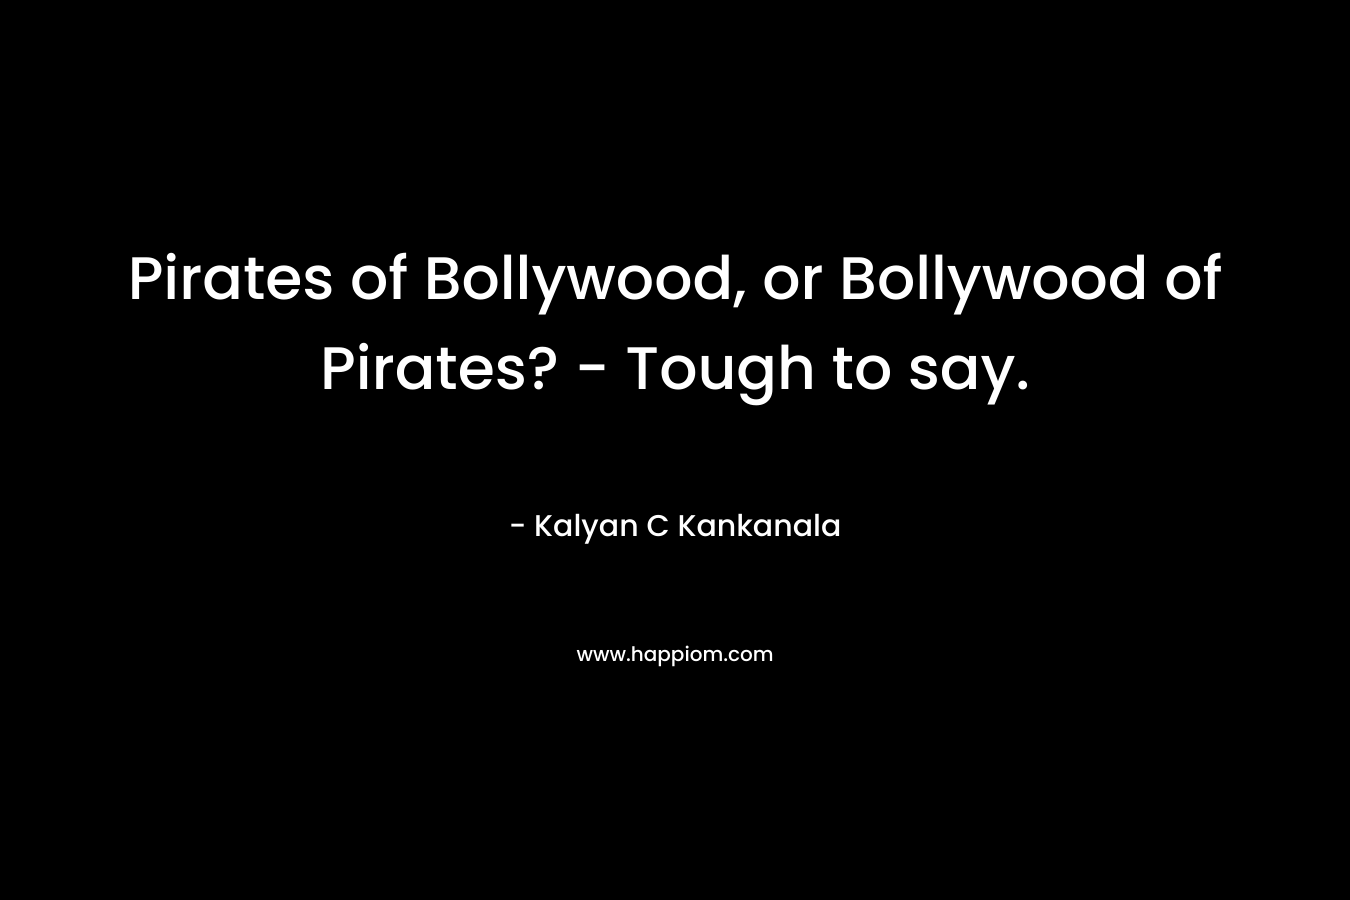 Pirates of Bollywood, or Bollywood of Pirates? - Tough to say.